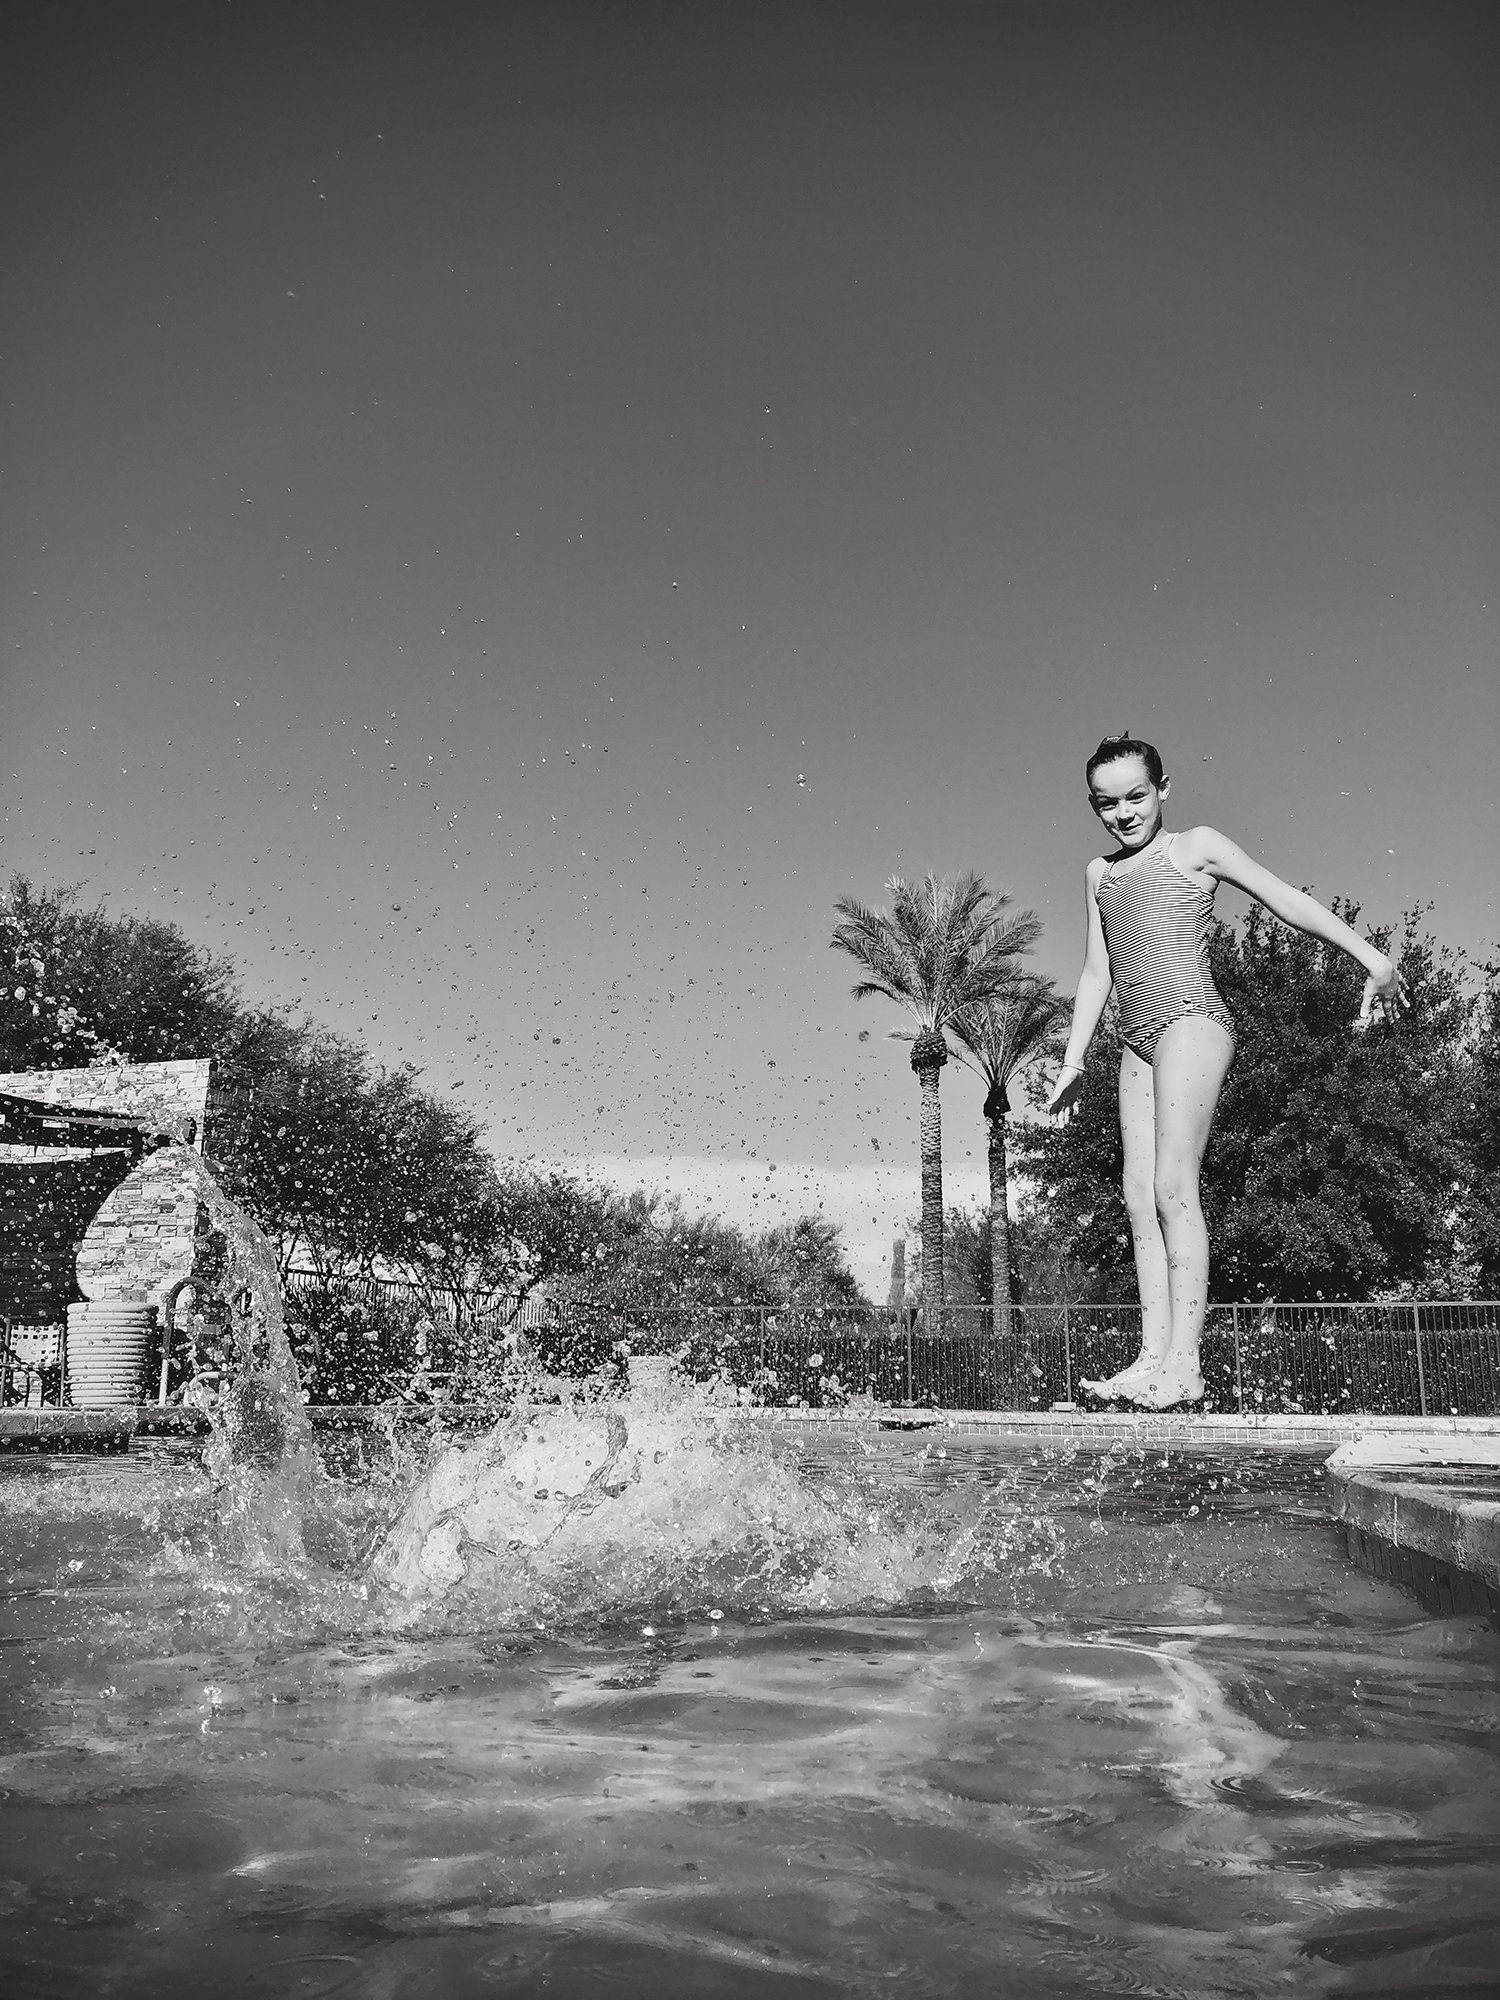 Pool days in the Arizona desert. A black and white collection of beating the triple degree heat and enjoying time with as a family. Desert living during the summer months at it's finest! #BlackAndWhitePhotography #Arizona #Phoenix #Poolside